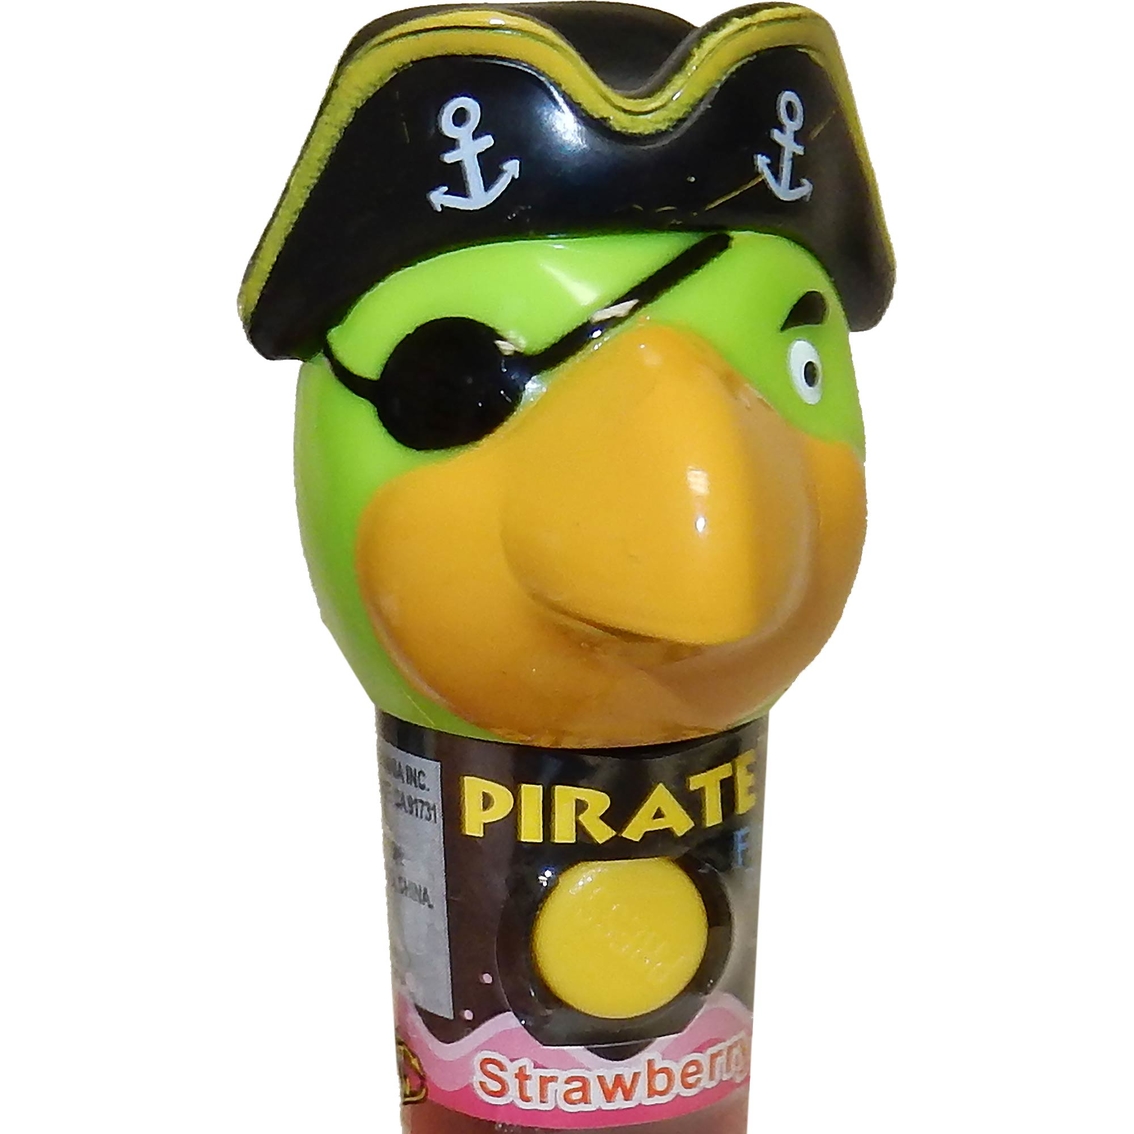 Kidsmania Pirate Flash Pop with Candy 12 pk. - Image 2 of 2